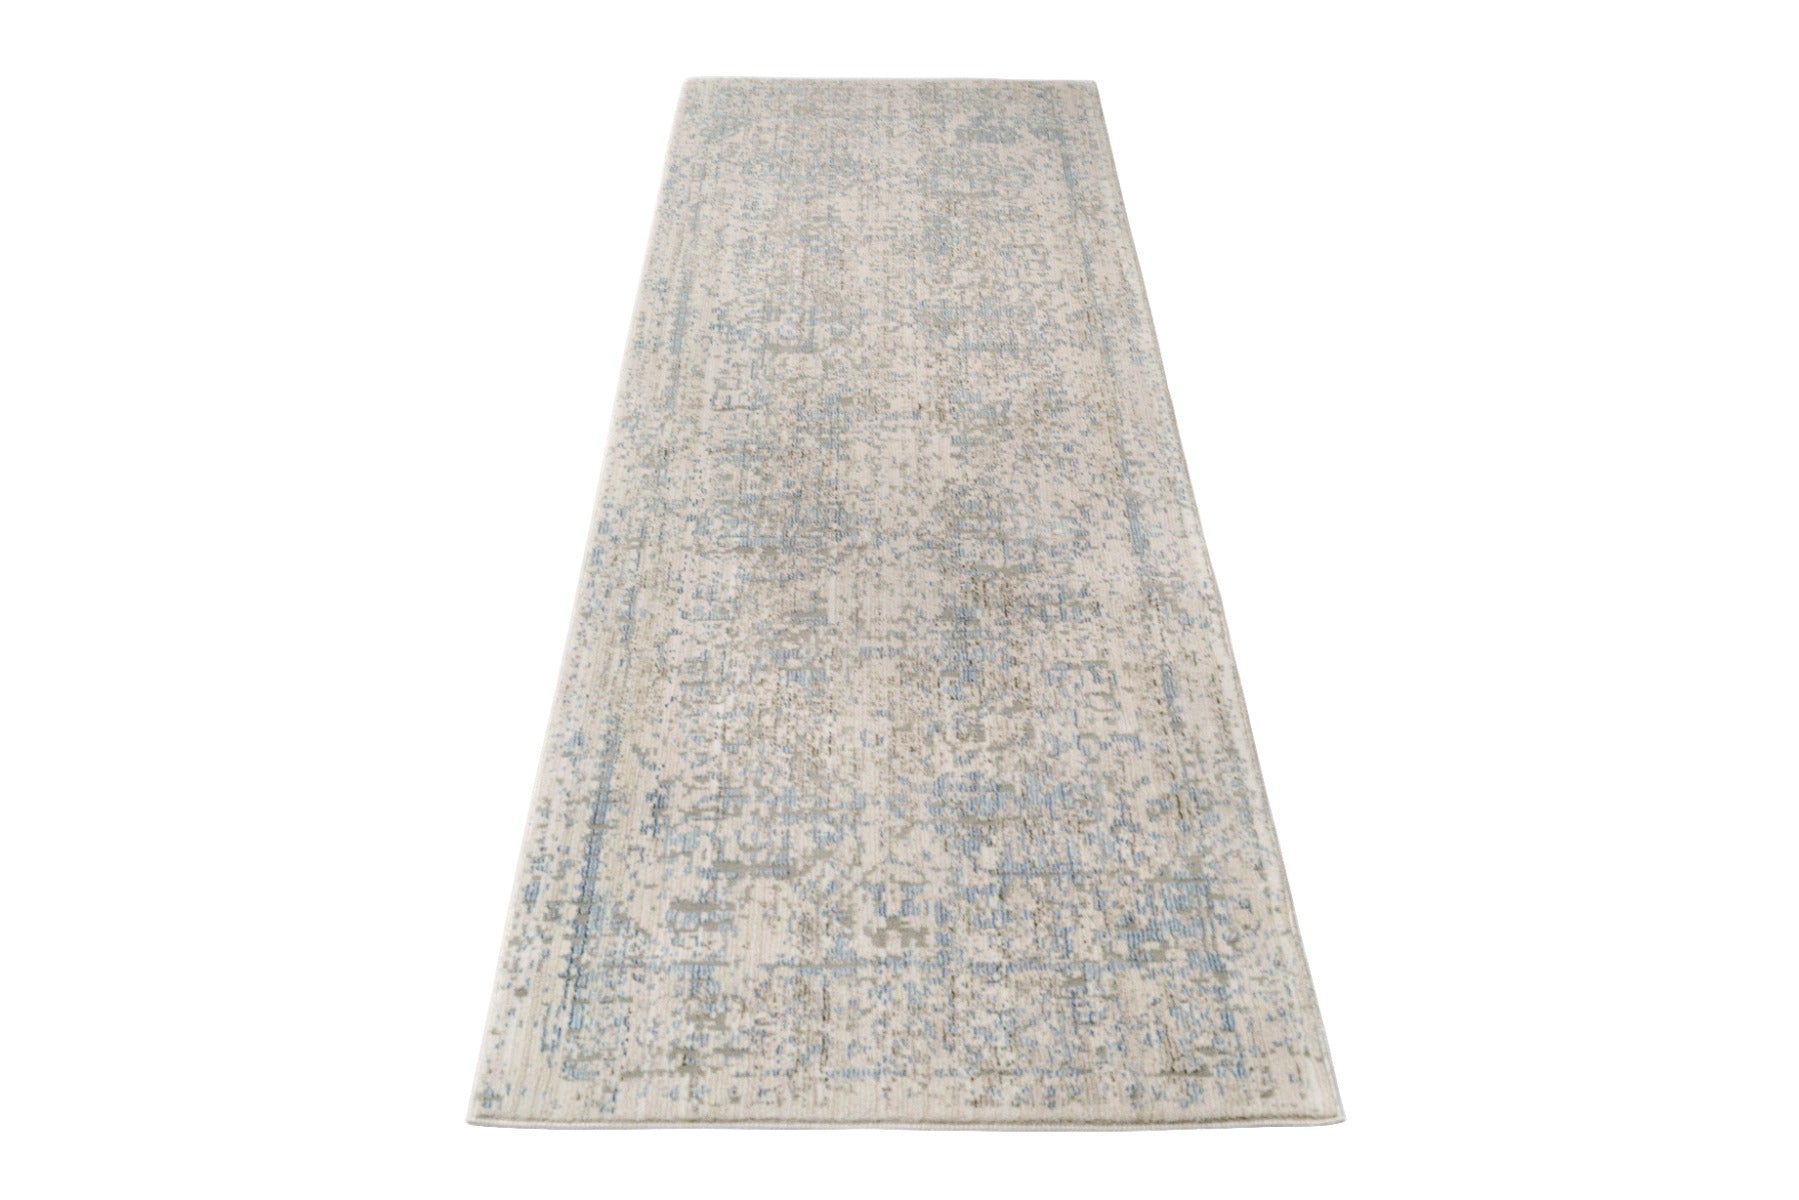 Persian style hallway runner in blue and grey